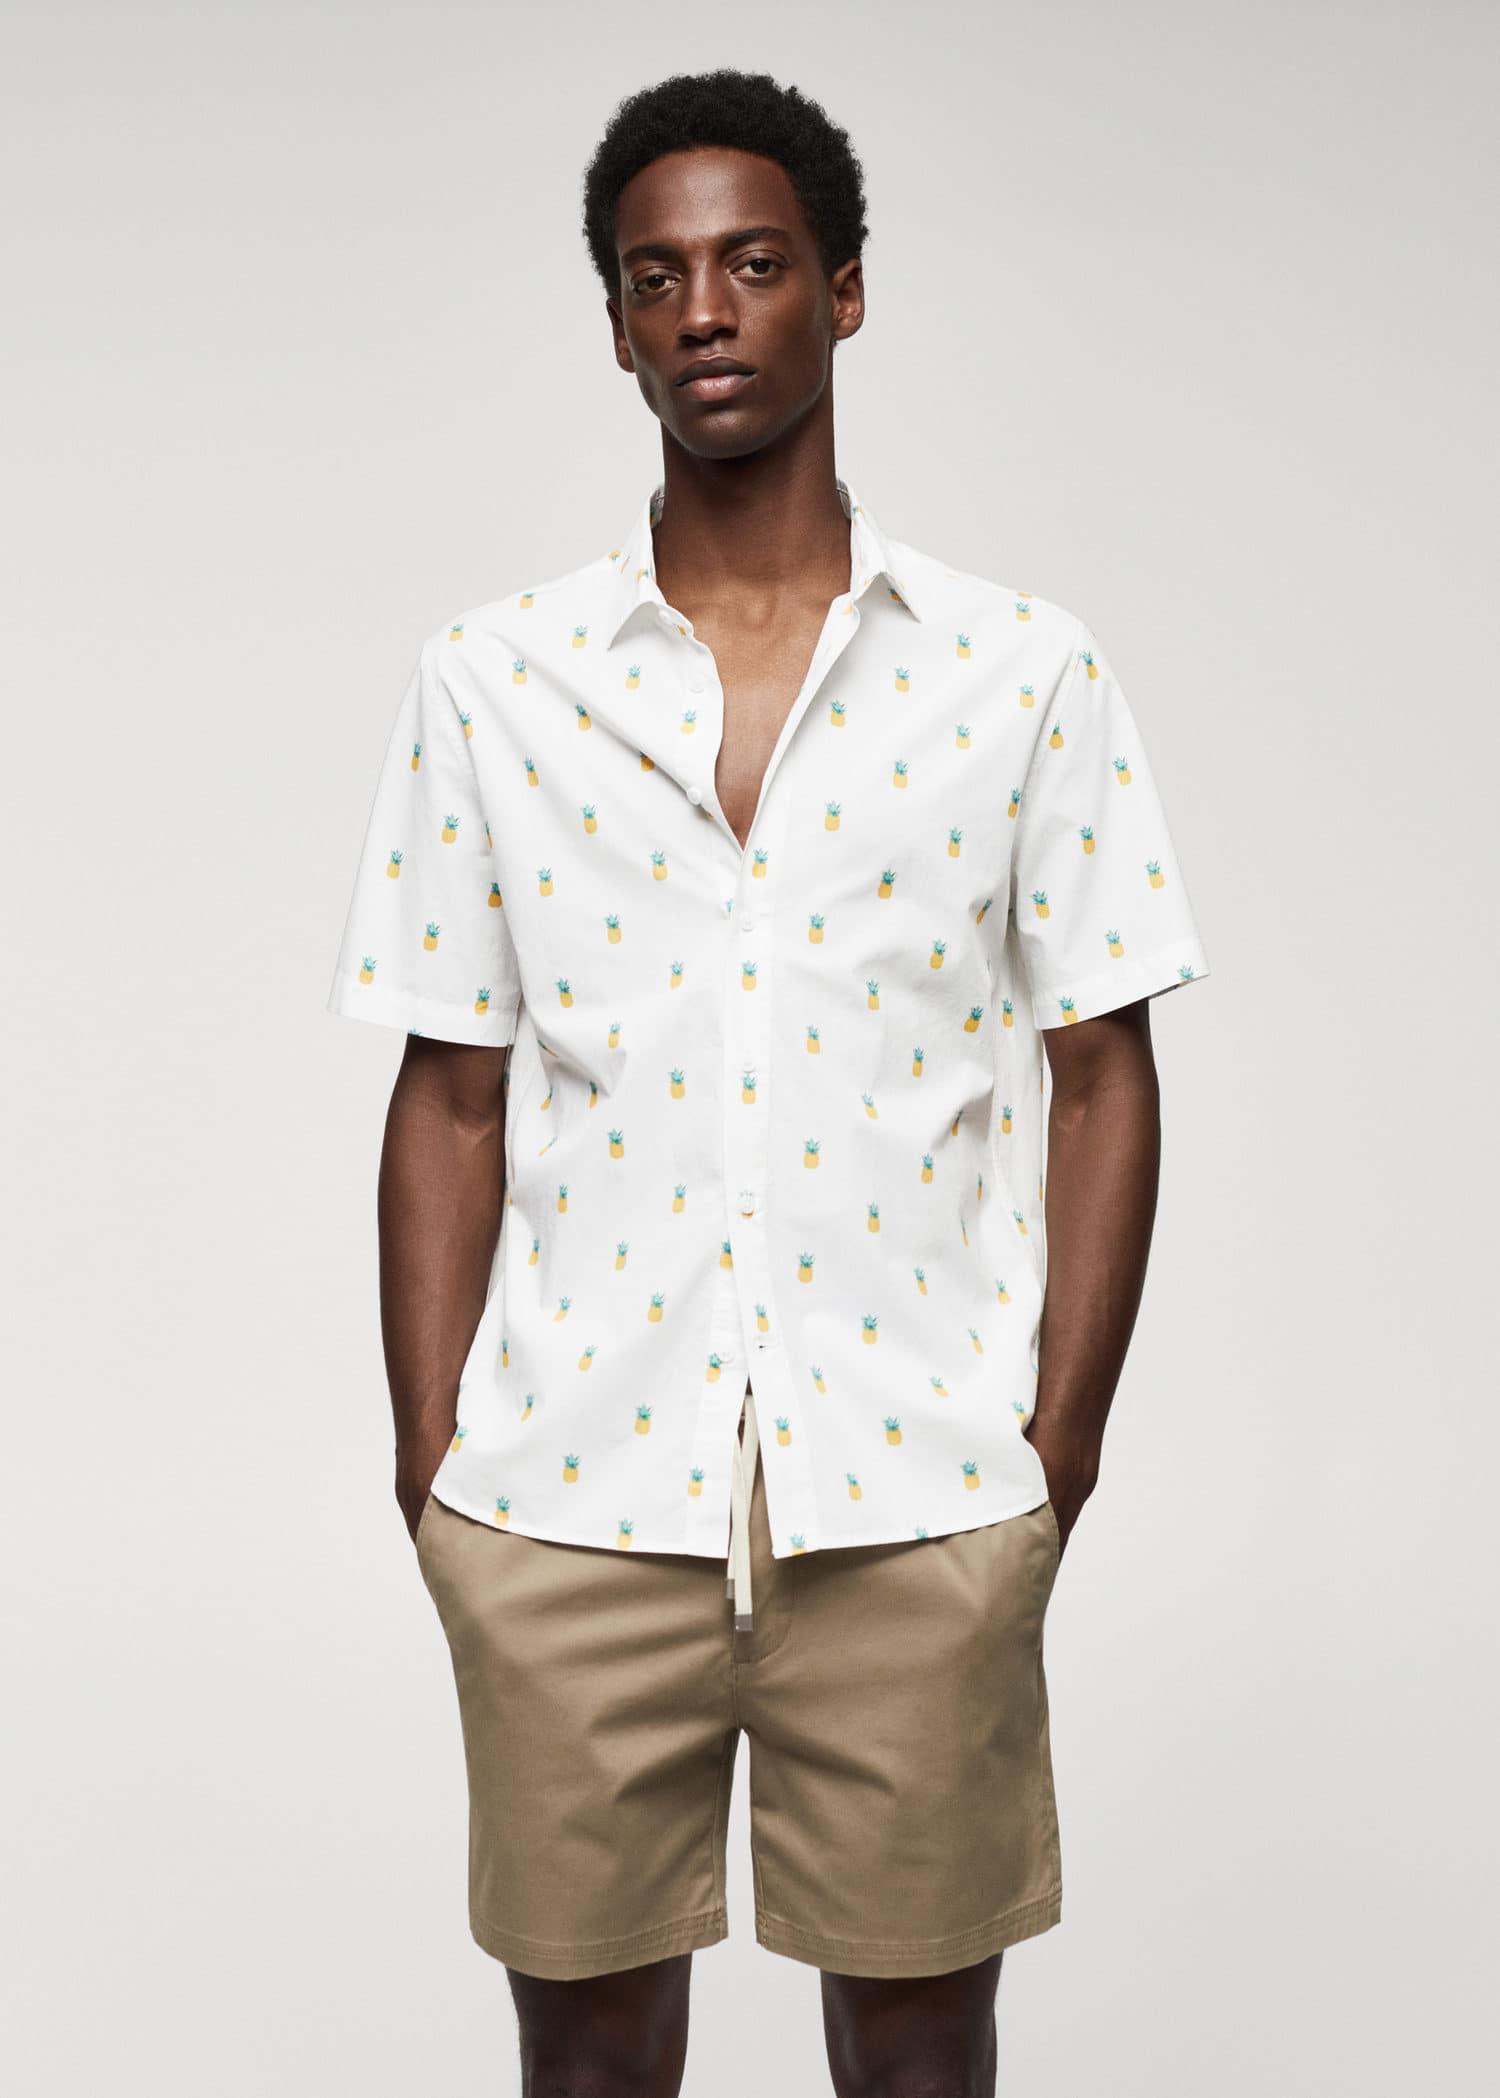 100% cotton shirt with pineapple print